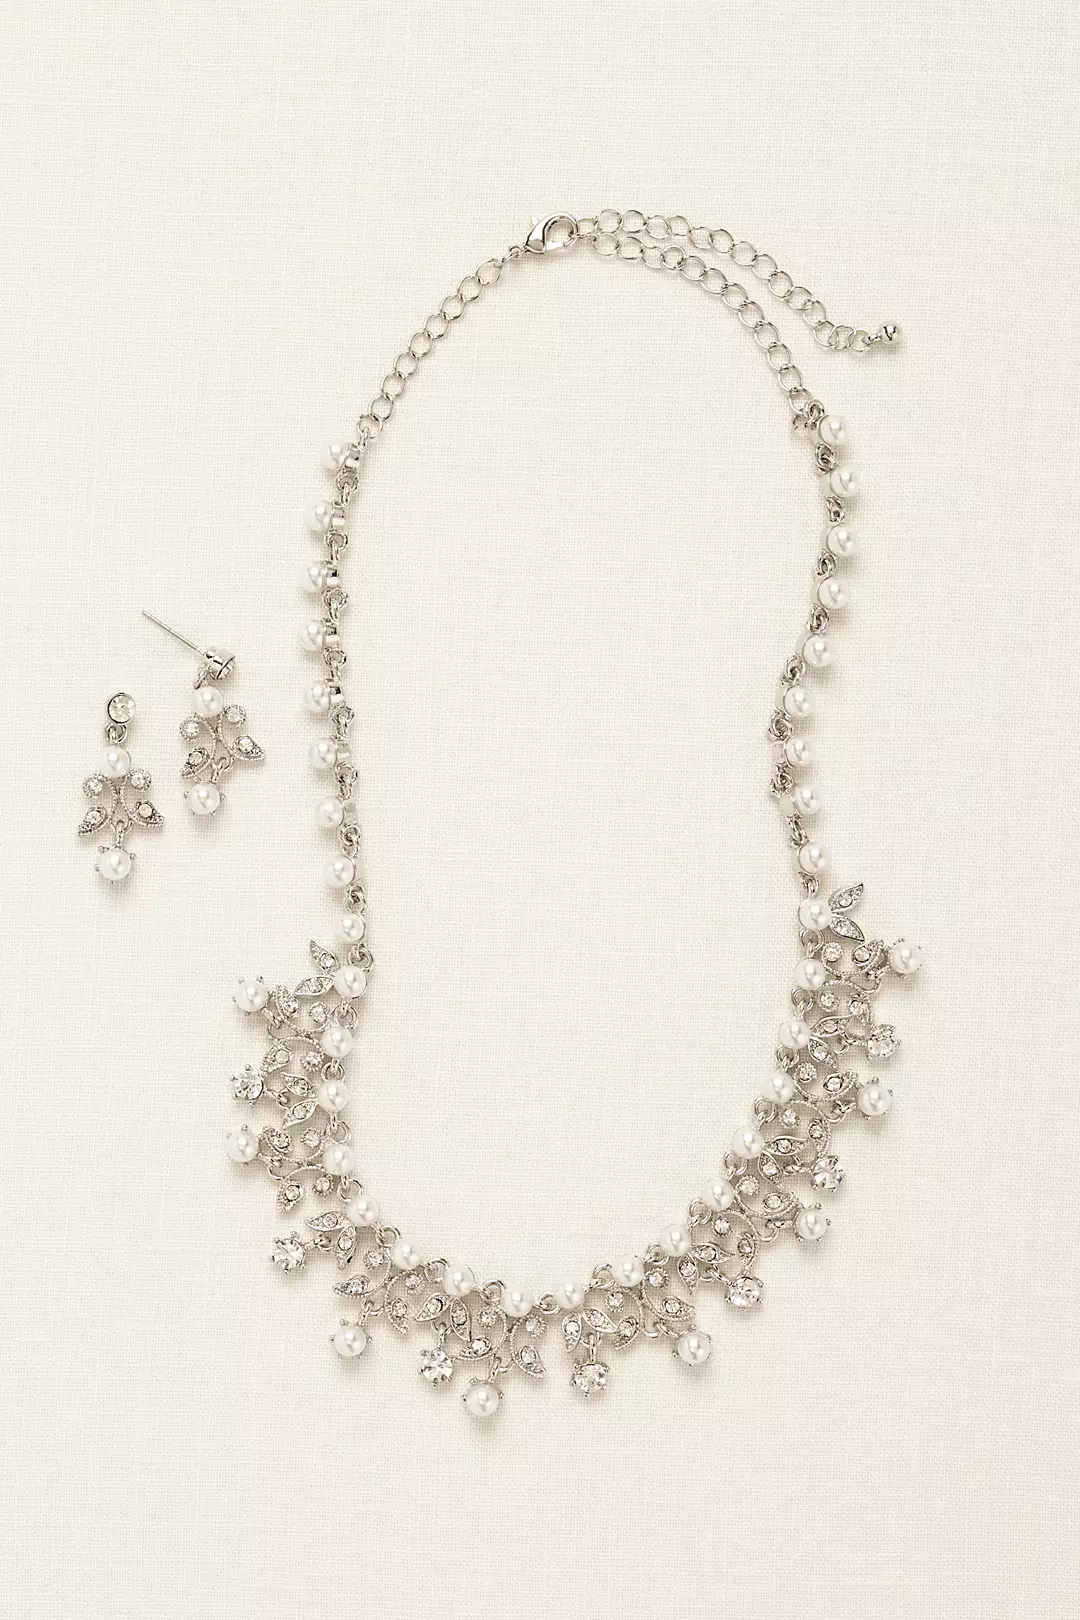 Pearl and Rhinestone Scroll Necklace Set Image